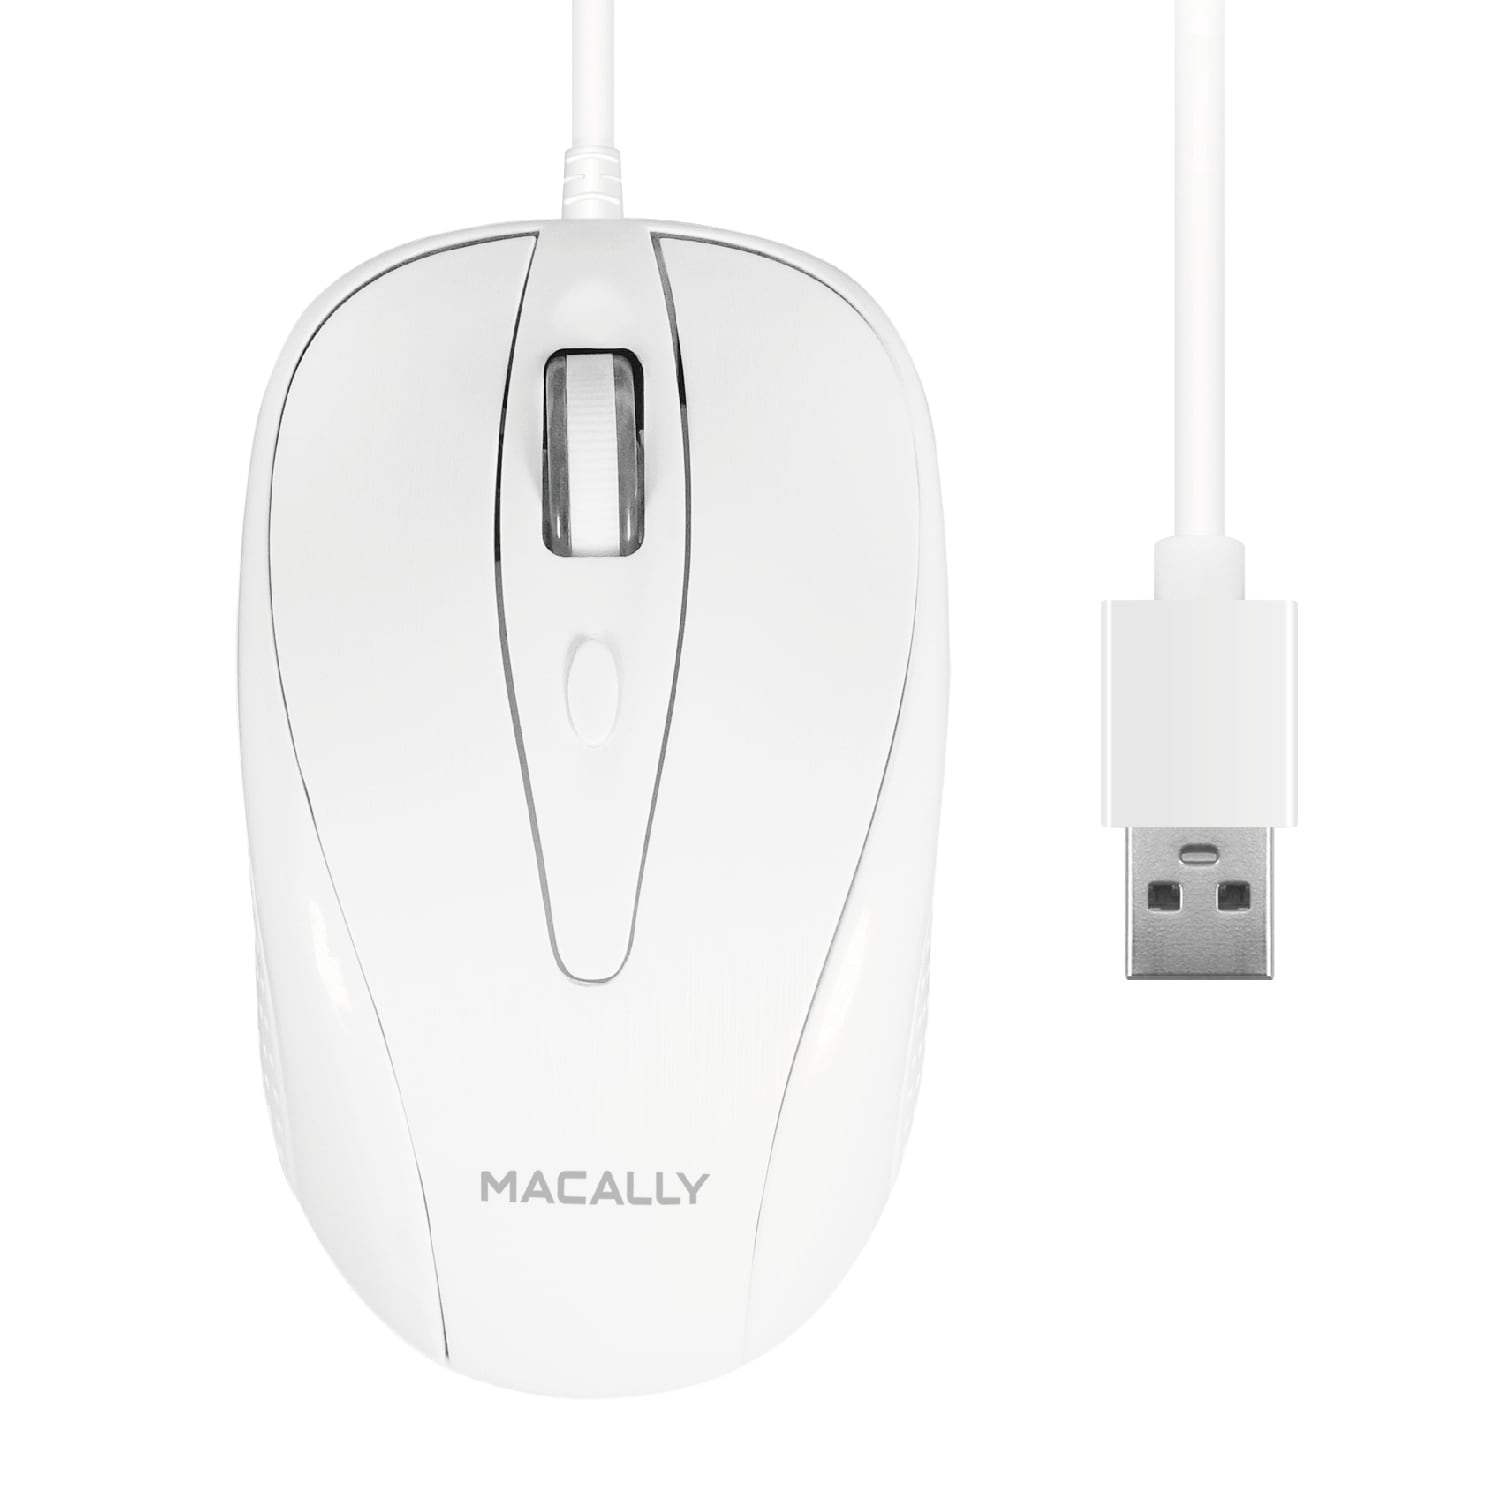 Macally Macally USB Wired Mouse with 3 Scroll Wheel, and 5 Foot Long Cord, Compatible with Apple MacBook Pro Air, iMac, Mac Mini, Desktop Computer, and PC (TURBO) in